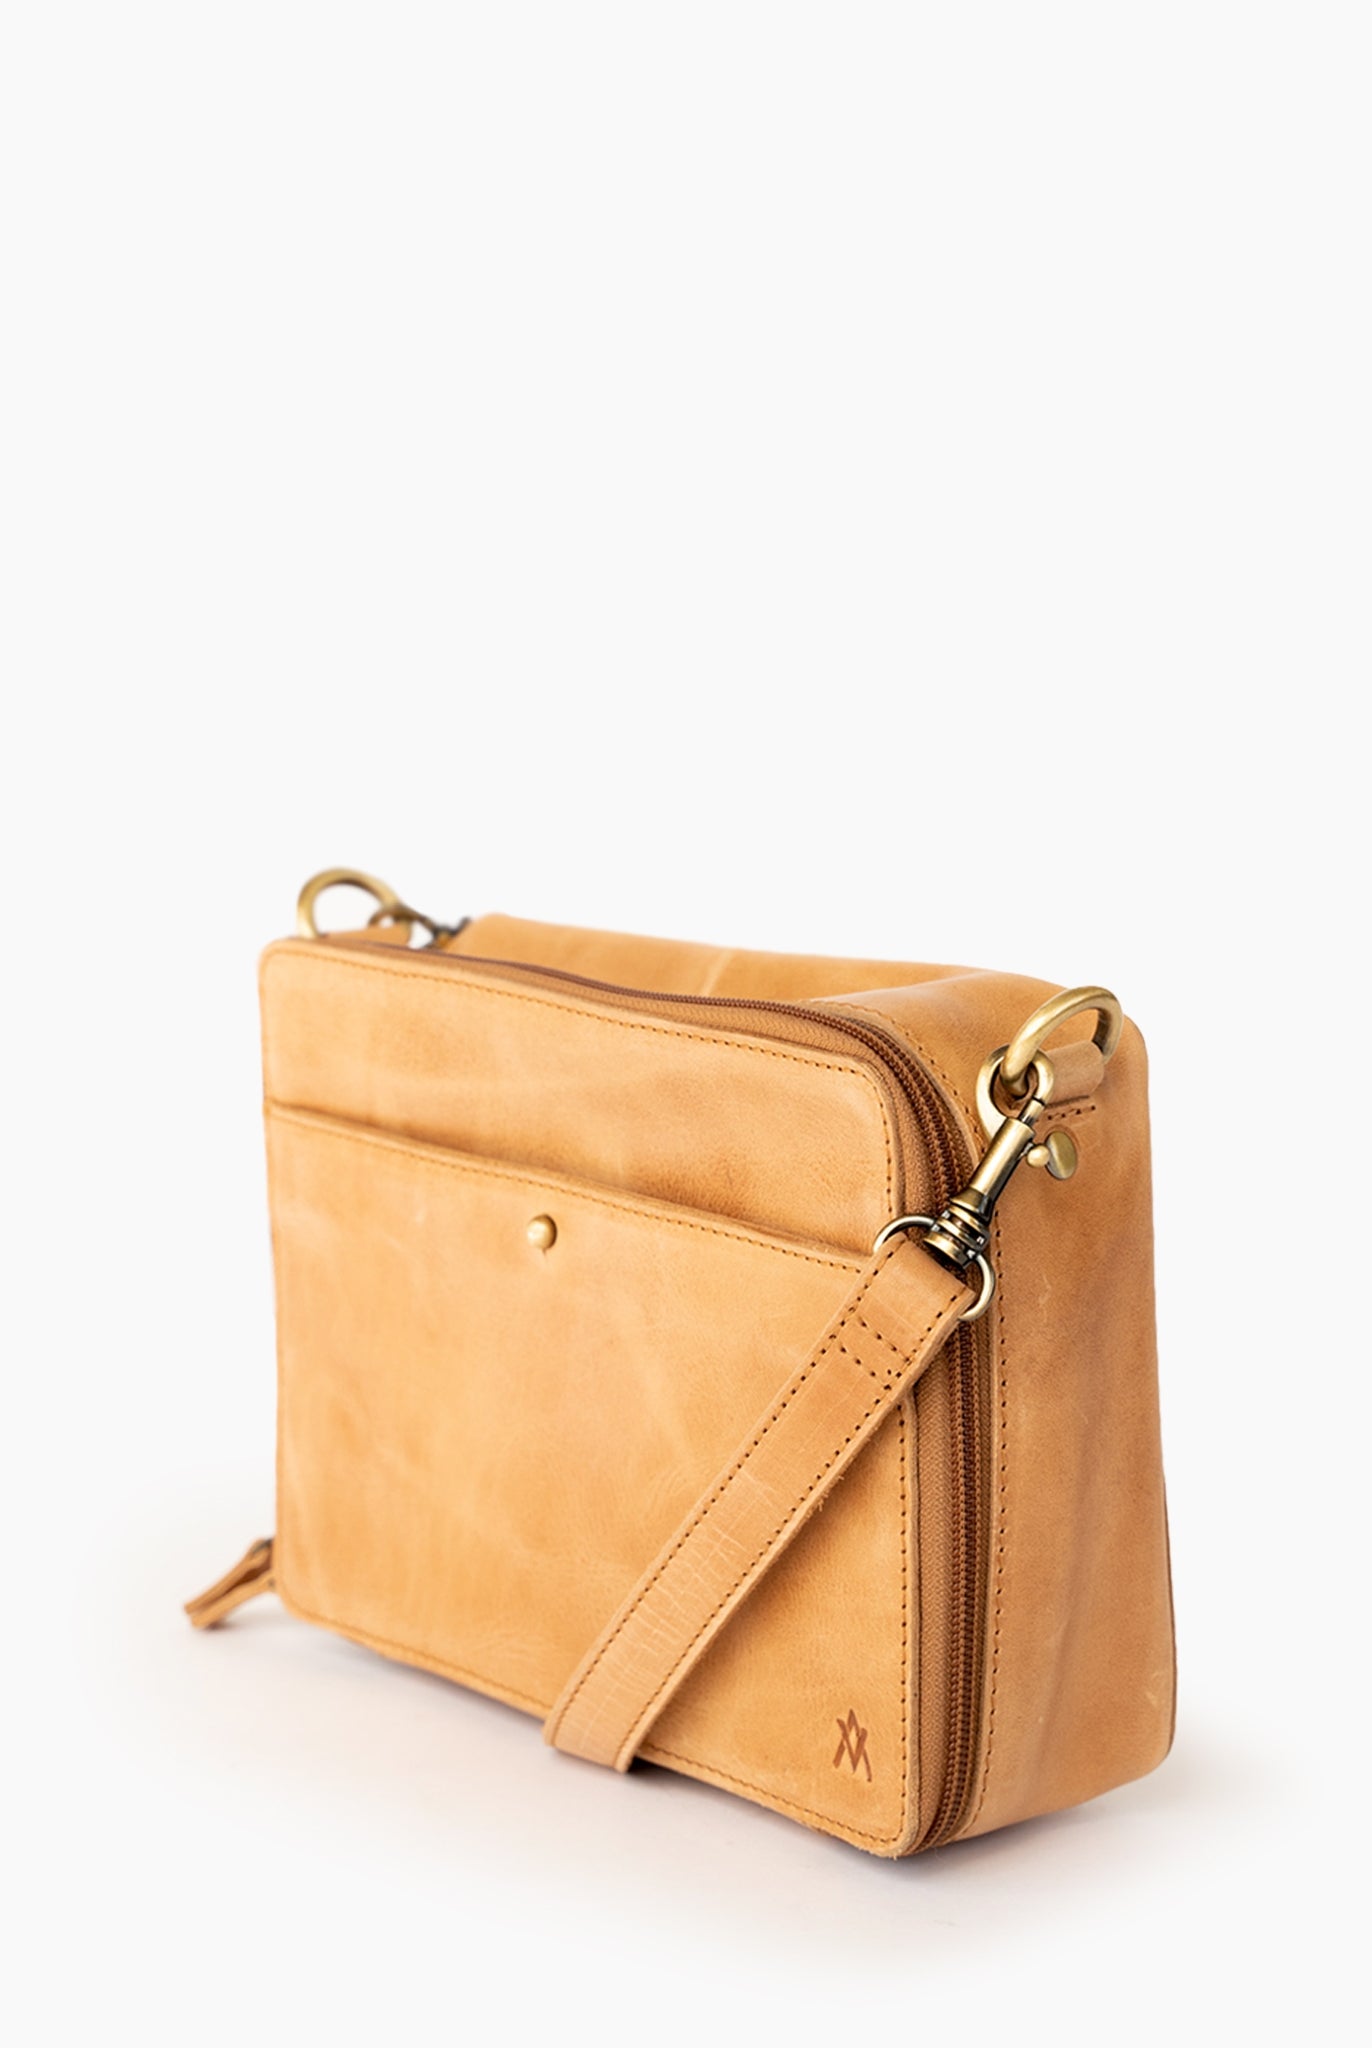 Elevate ethical crossbody bag raleigh ethical boutique